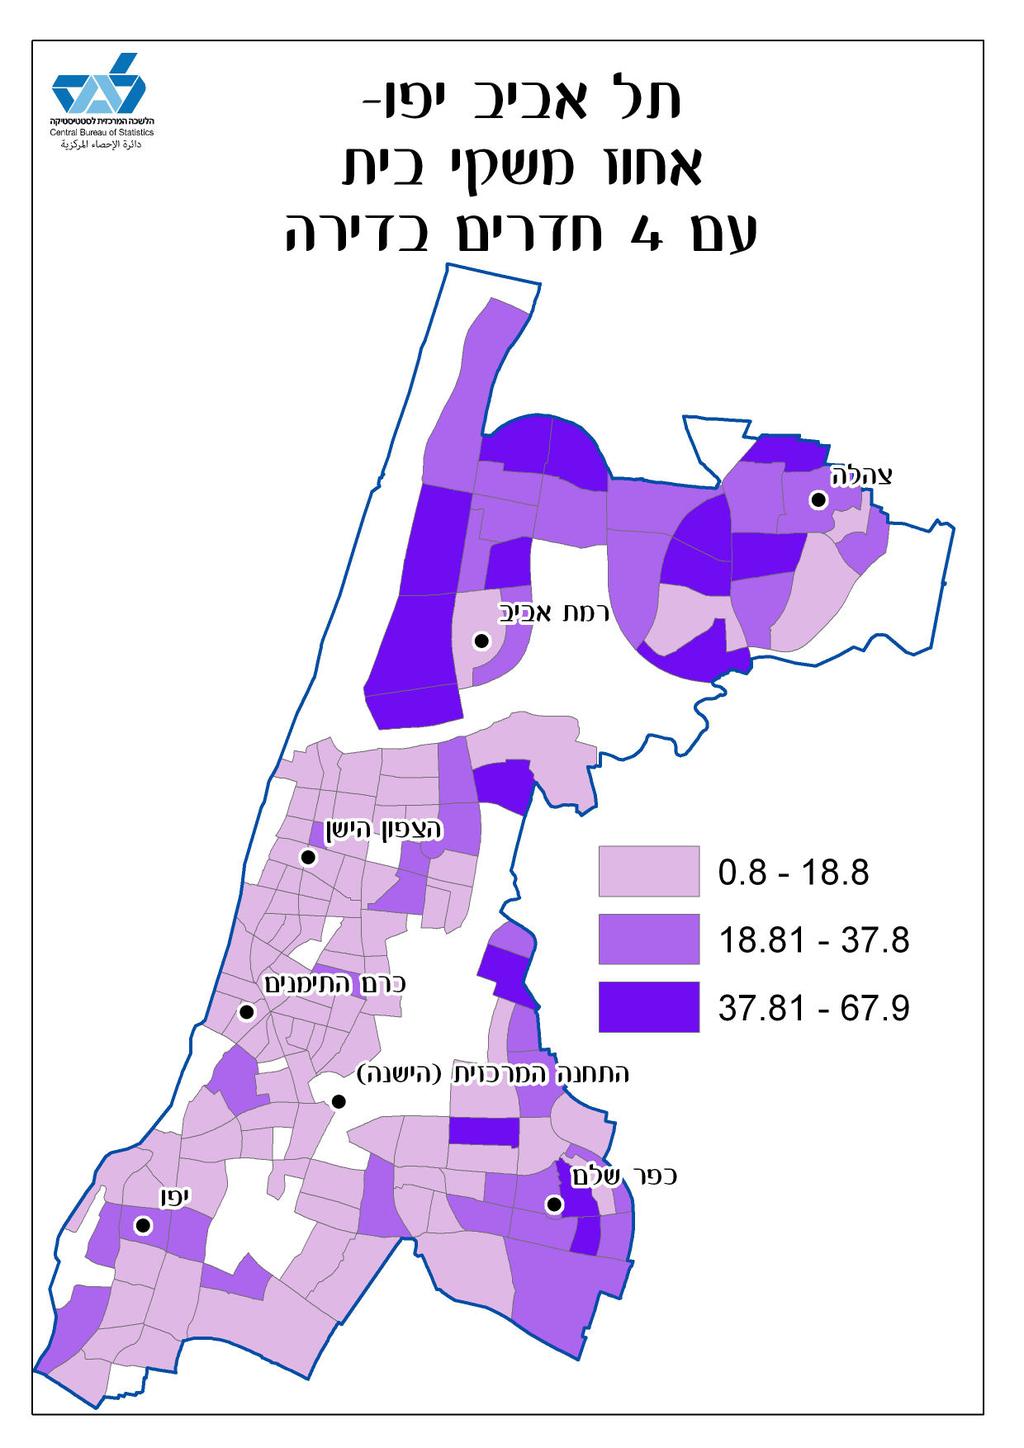 ISRAEL GIS for 2008 Integrated Population Census 4+ rooms per apartment Geospatial Information enabled the production of analyses and publications on various topics, used by the